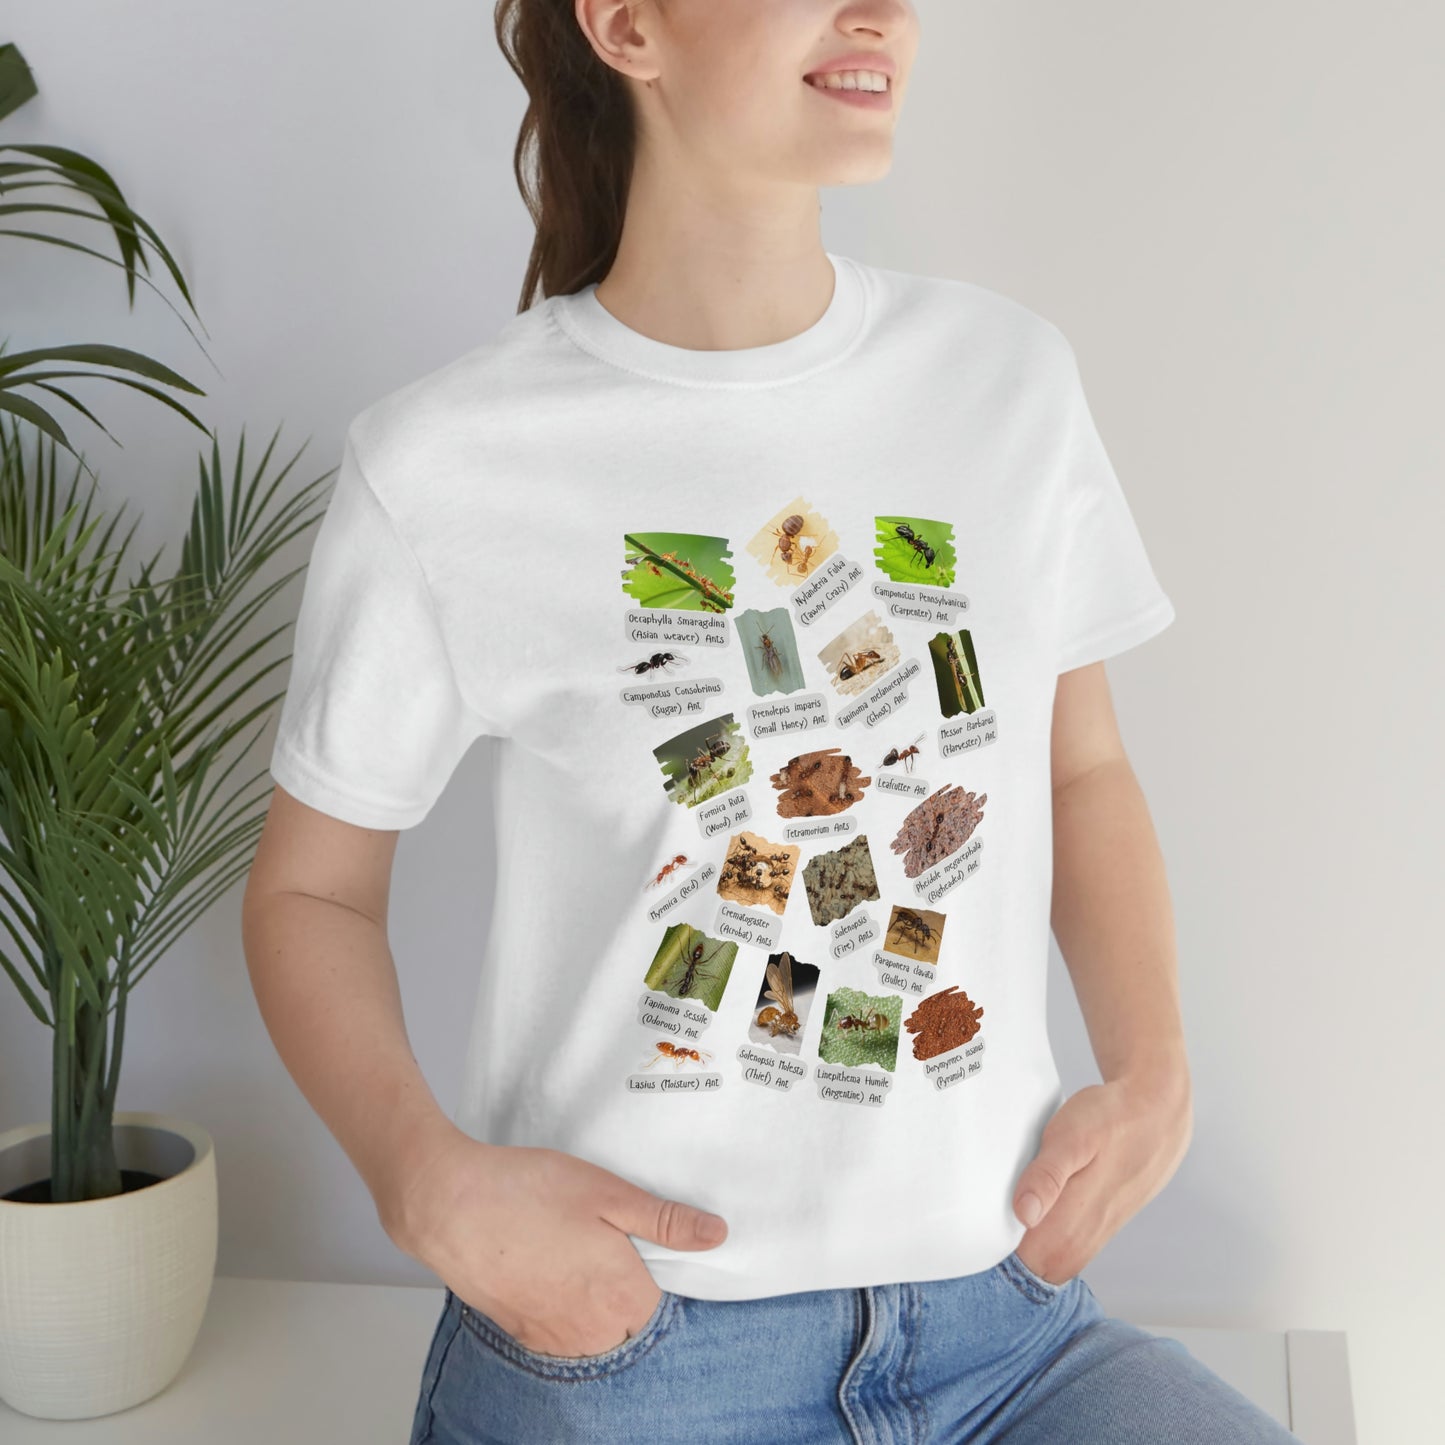 Awesome Ants T-shirt